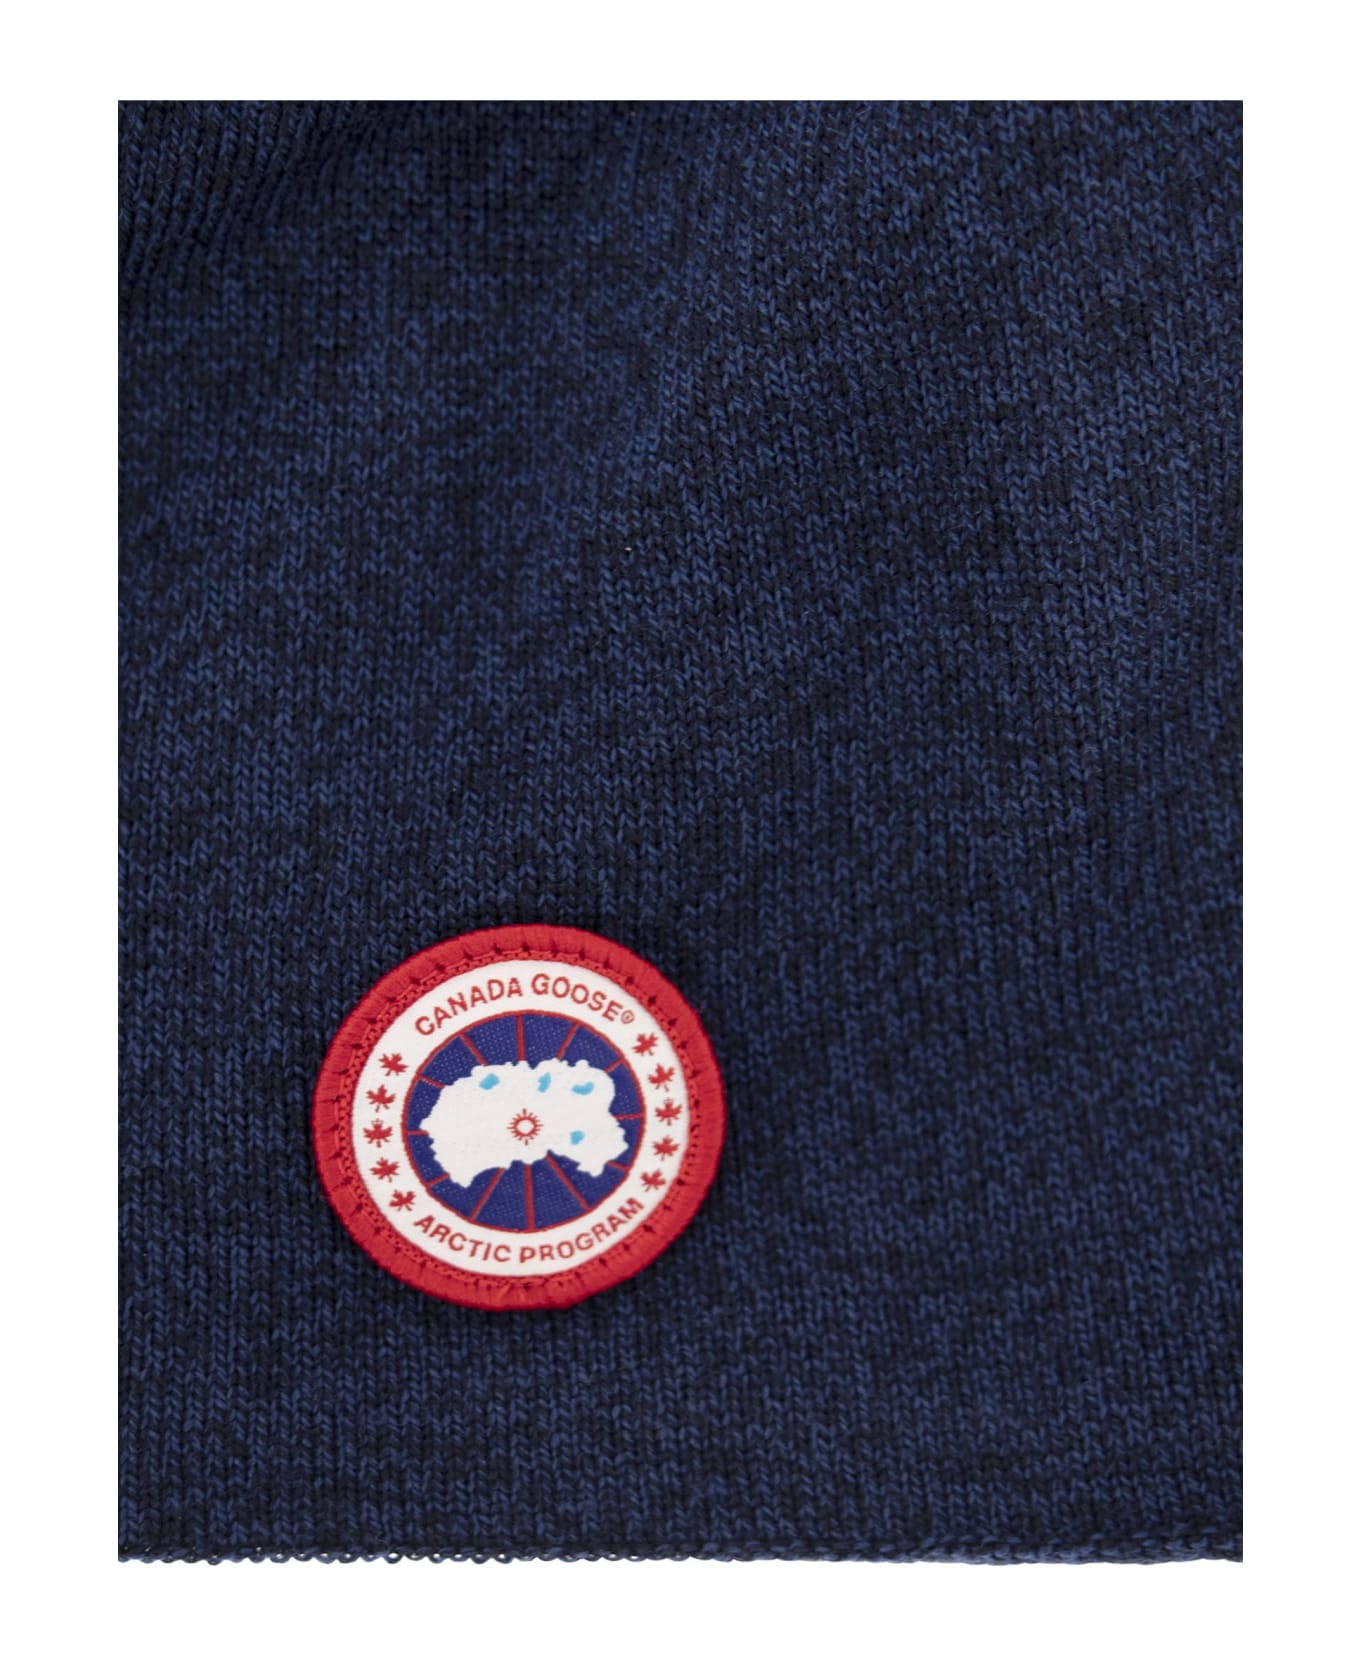 Canada Goose Toque - Hat In Wool Blend - Navy 帽子